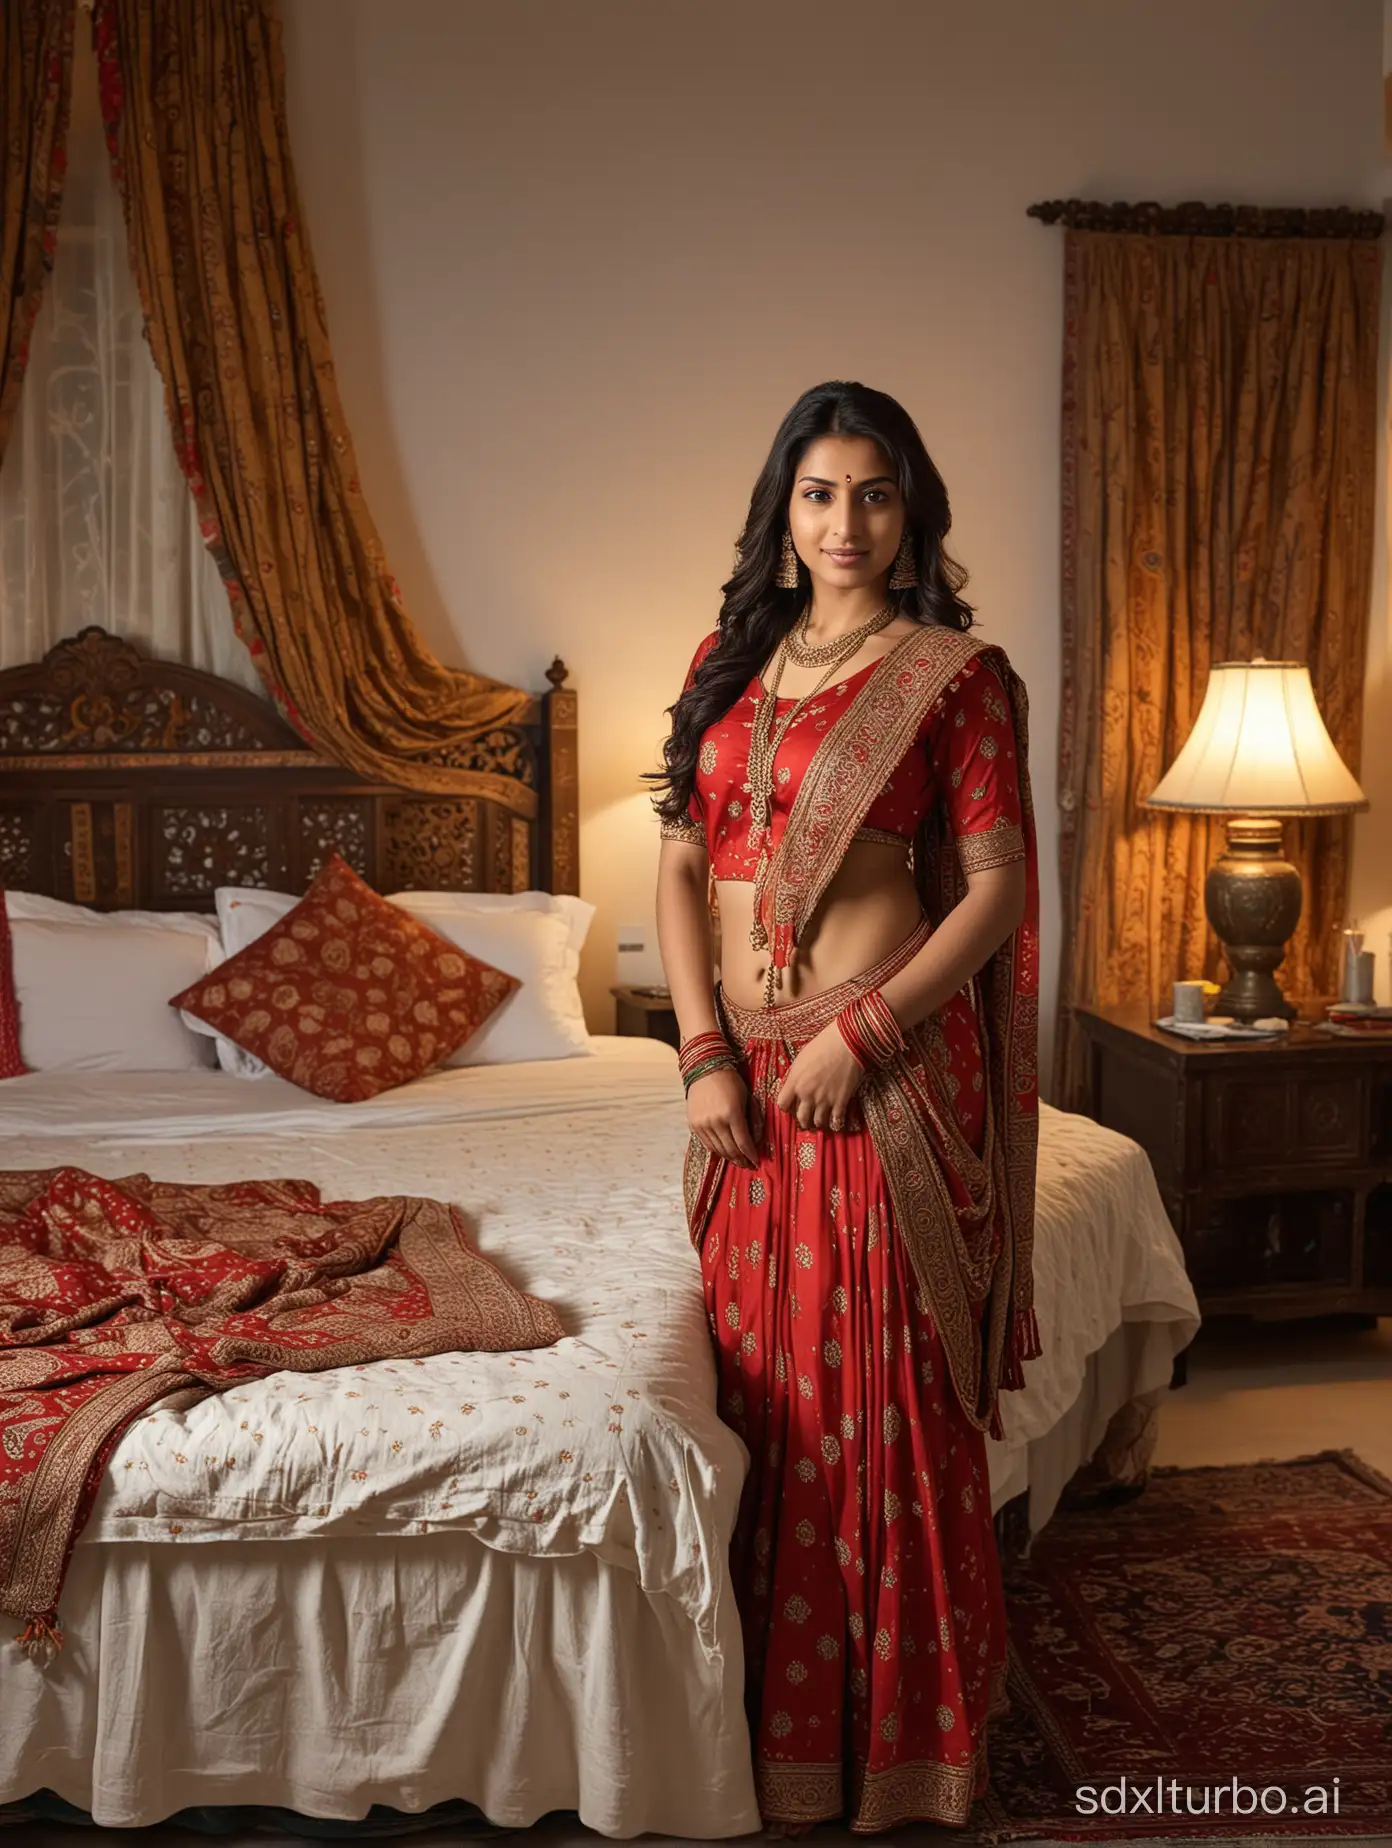 Indian woman in traditional costume standing next to bed in her bedroom which is furnished in traditional Indian style, room brightly lit, emulate Nikon D6 shot, wide angle shot, soft warm lighting, photorealistic, one lamp in background, bedsheet straight, picking item from bed